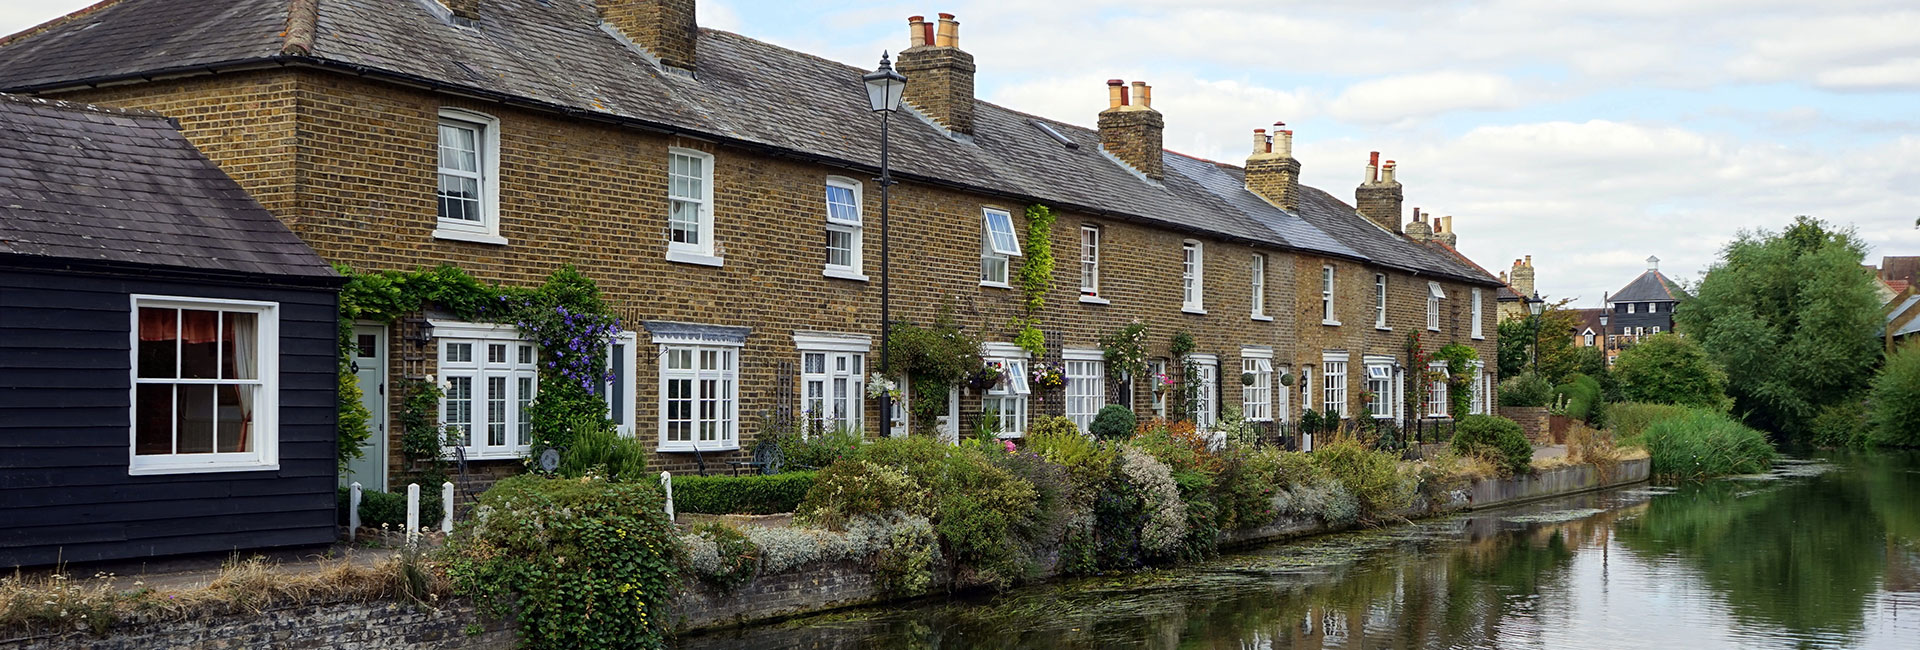 Row of country cottages next to a river - Property market - Property Activity